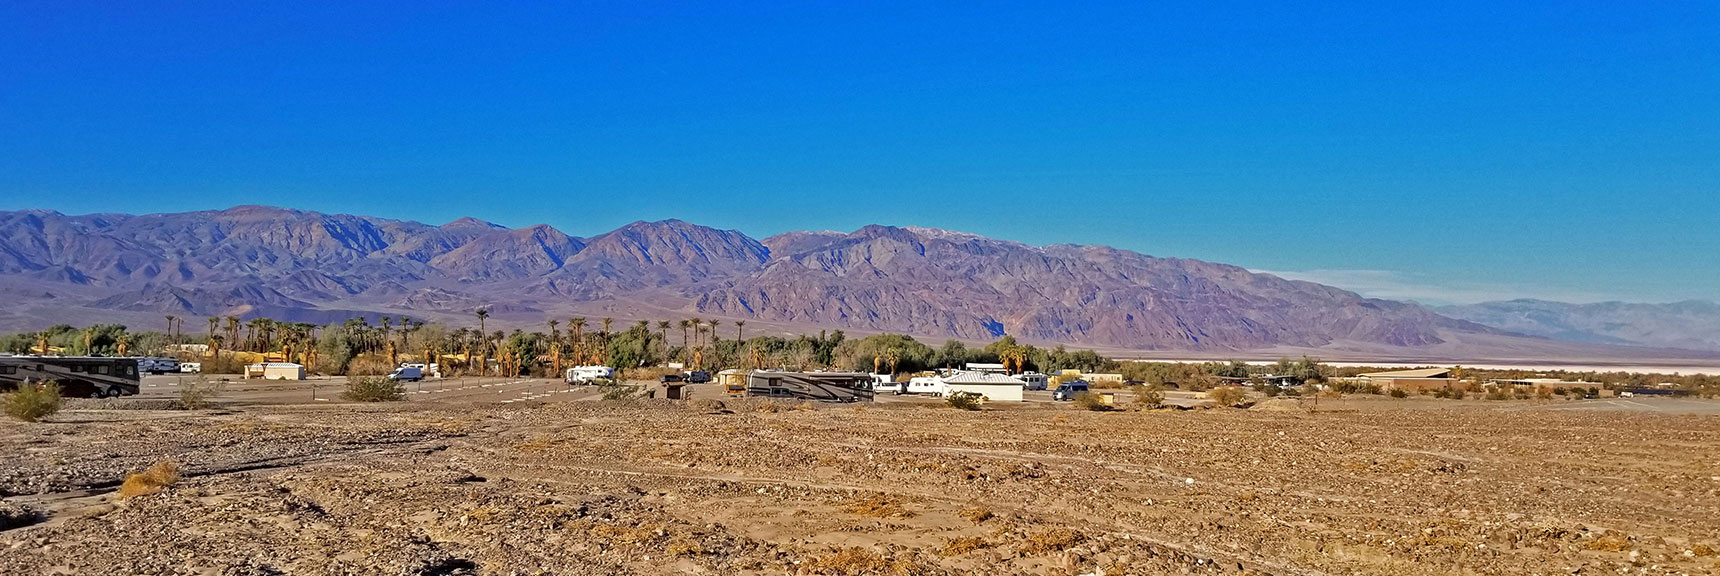 View Back Toward Furnace Creek Ranch, Panamint Range in Background | Tea House & Table Rock Circuit | Furnace Creek | Death Valley National Park, California